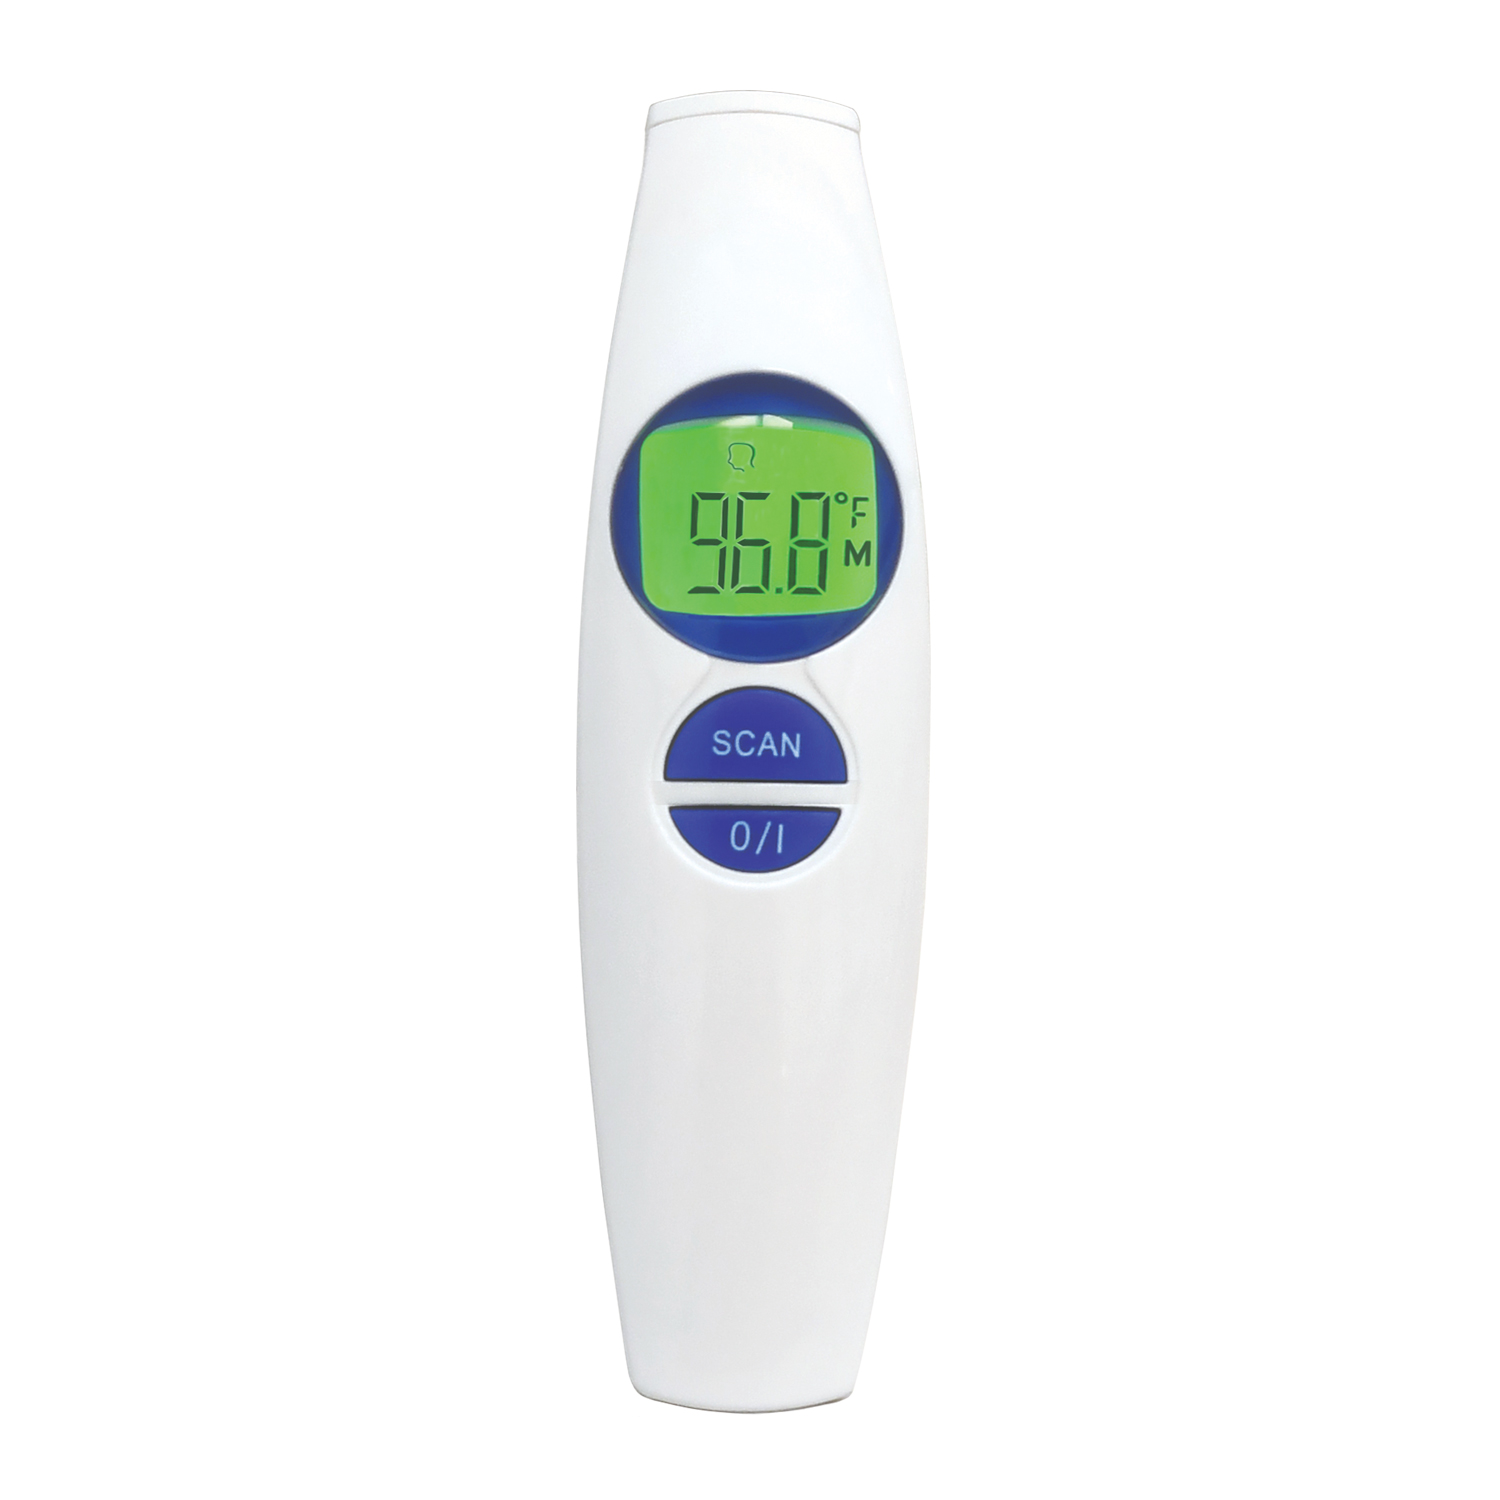 Infrared thermometer - A. V. Hospital